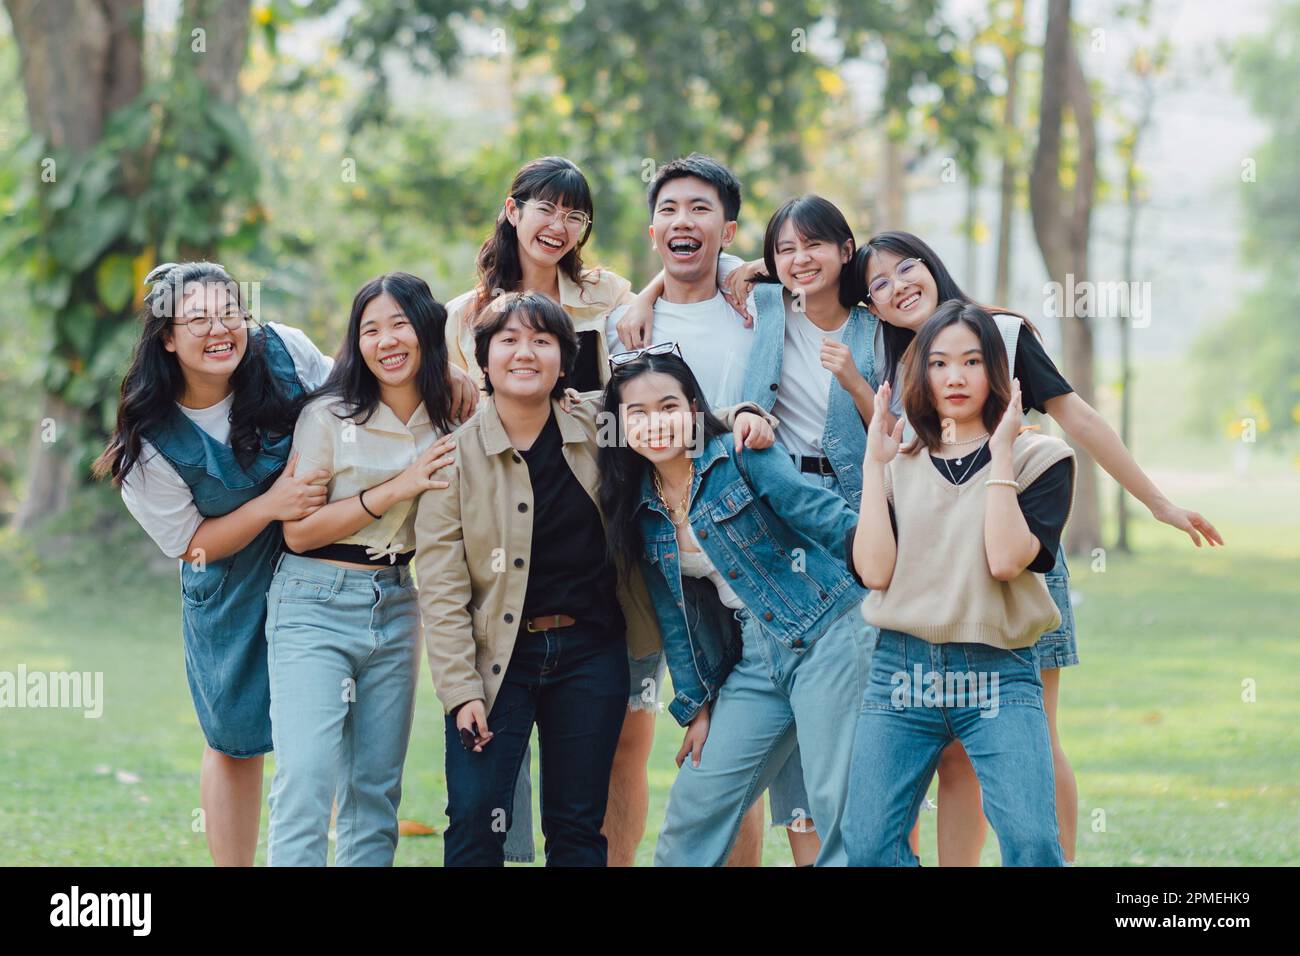 Groups of friends embrace each other together. Concept for kindness support of people having fun with diversity millenials of gen z. Stock Photo